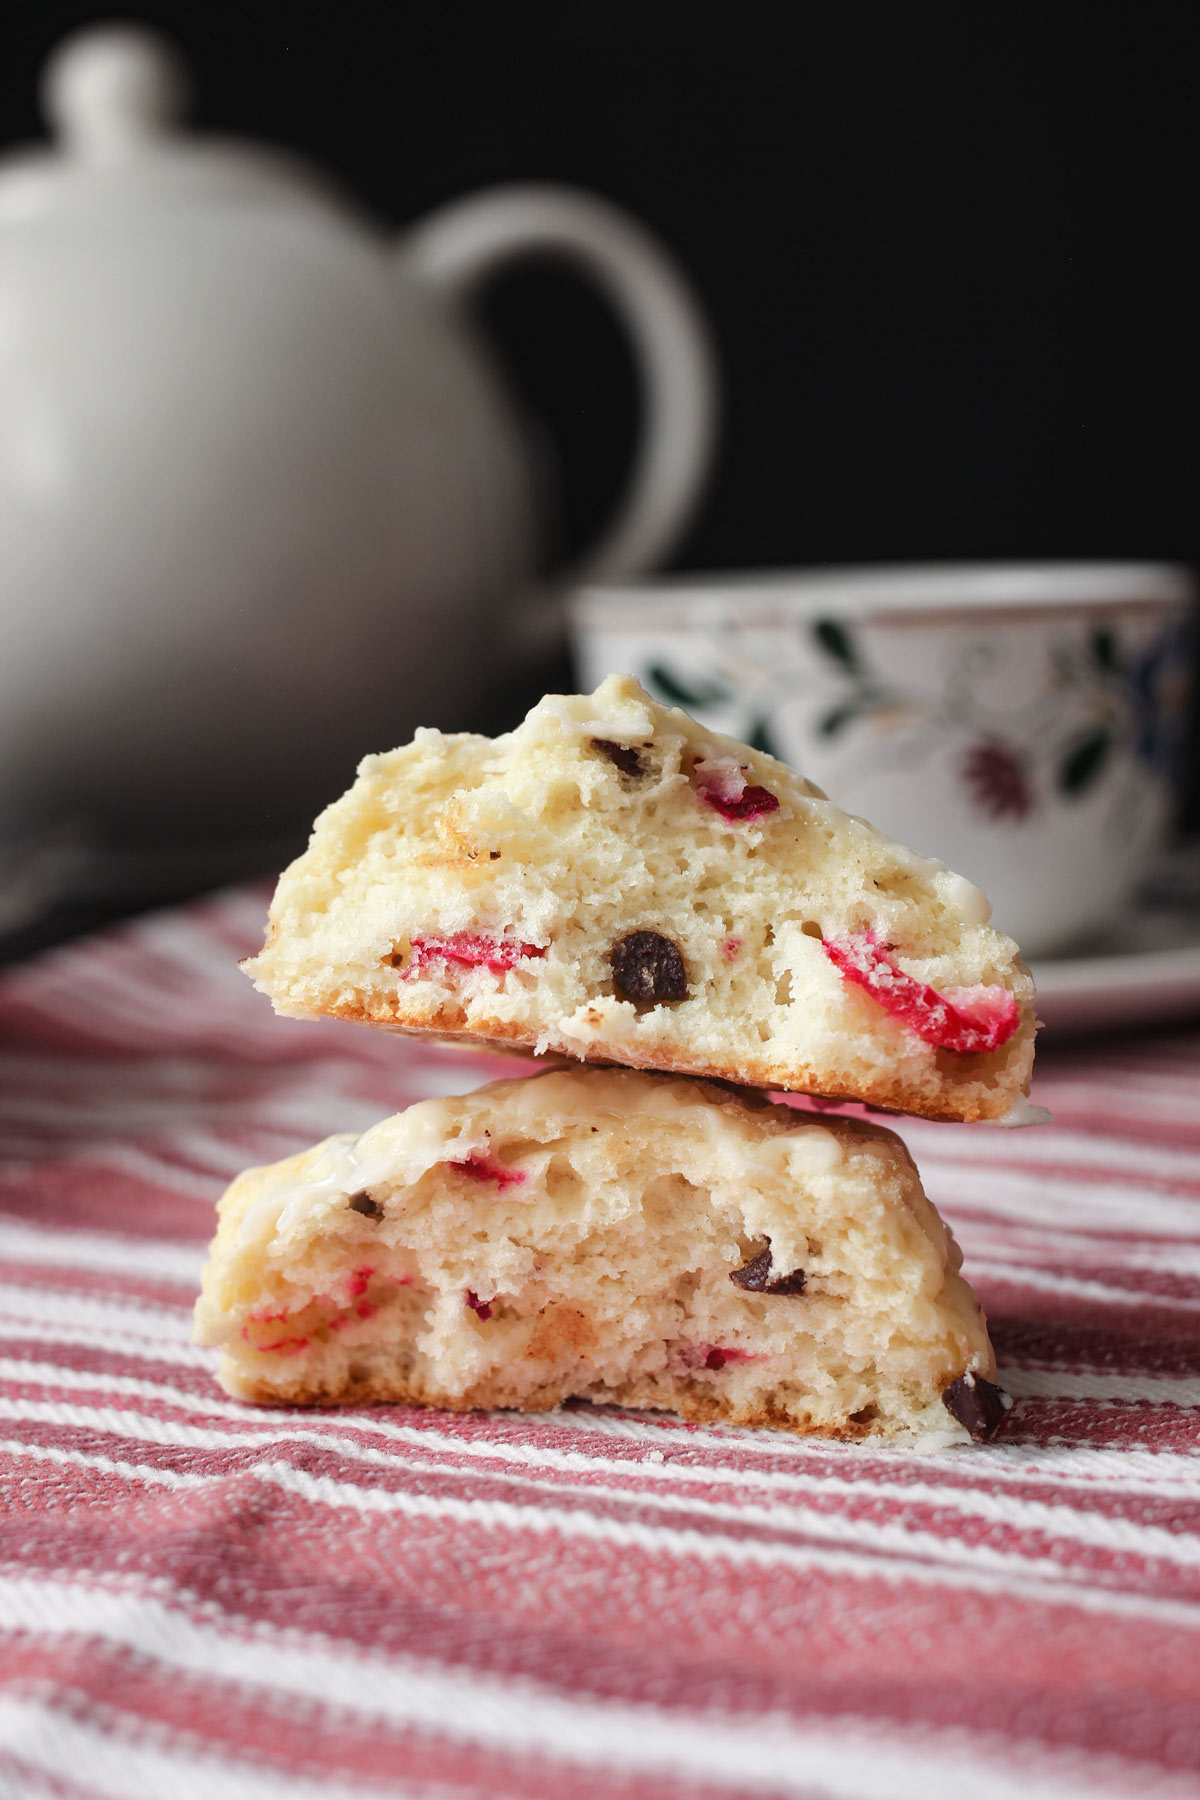 two halves of a scone stacked on a red striped cloth with a tea cup and tea pot in the background.